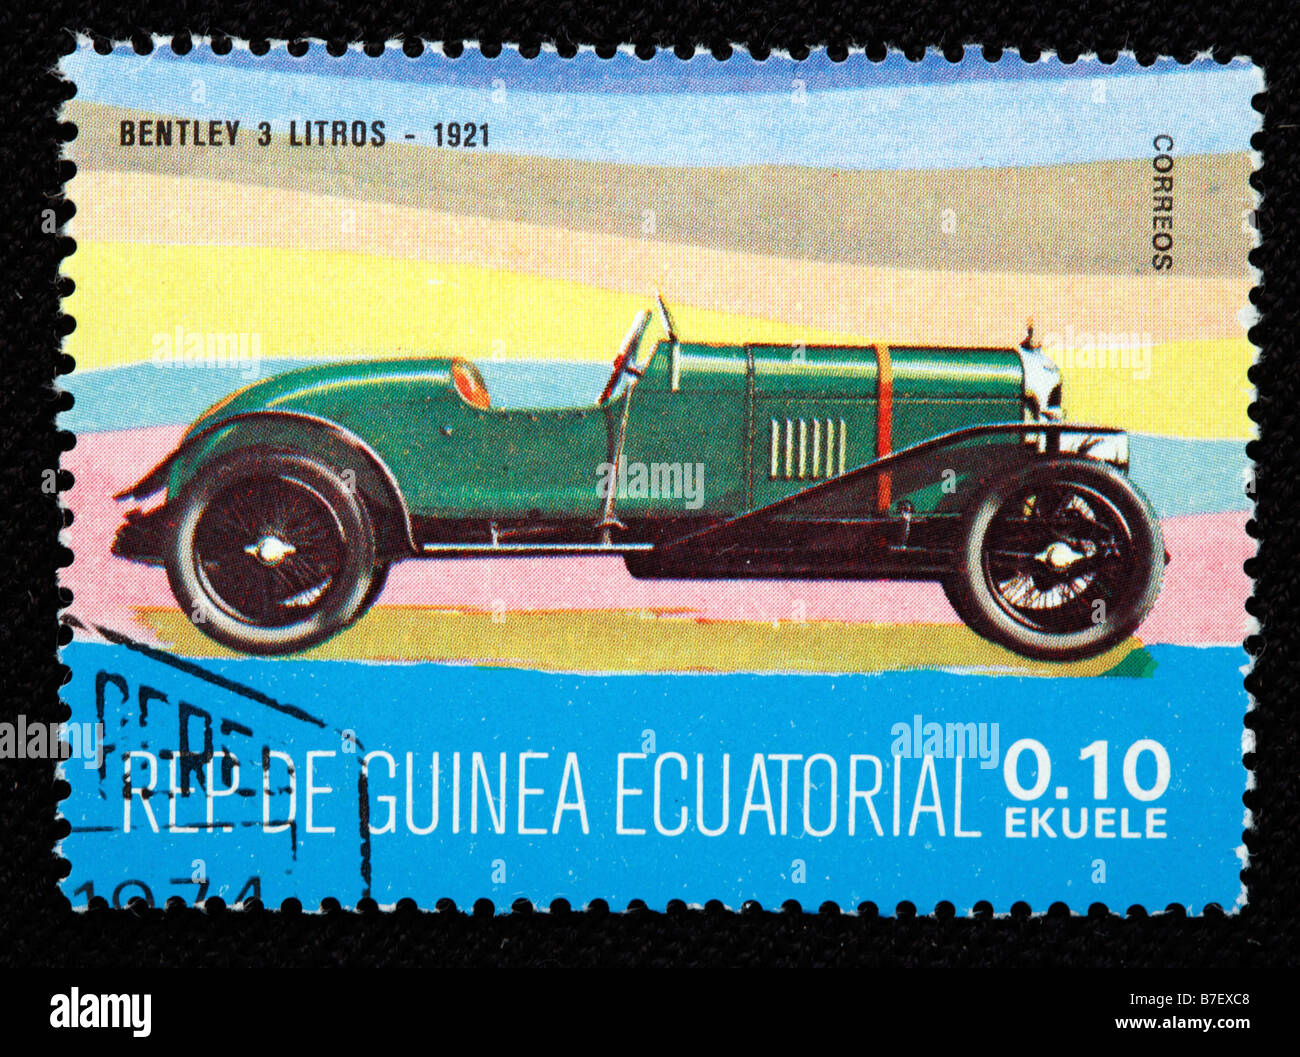 History of transport car Bentley (1921), postage stamp, Equatorial Guinea Stock Photo